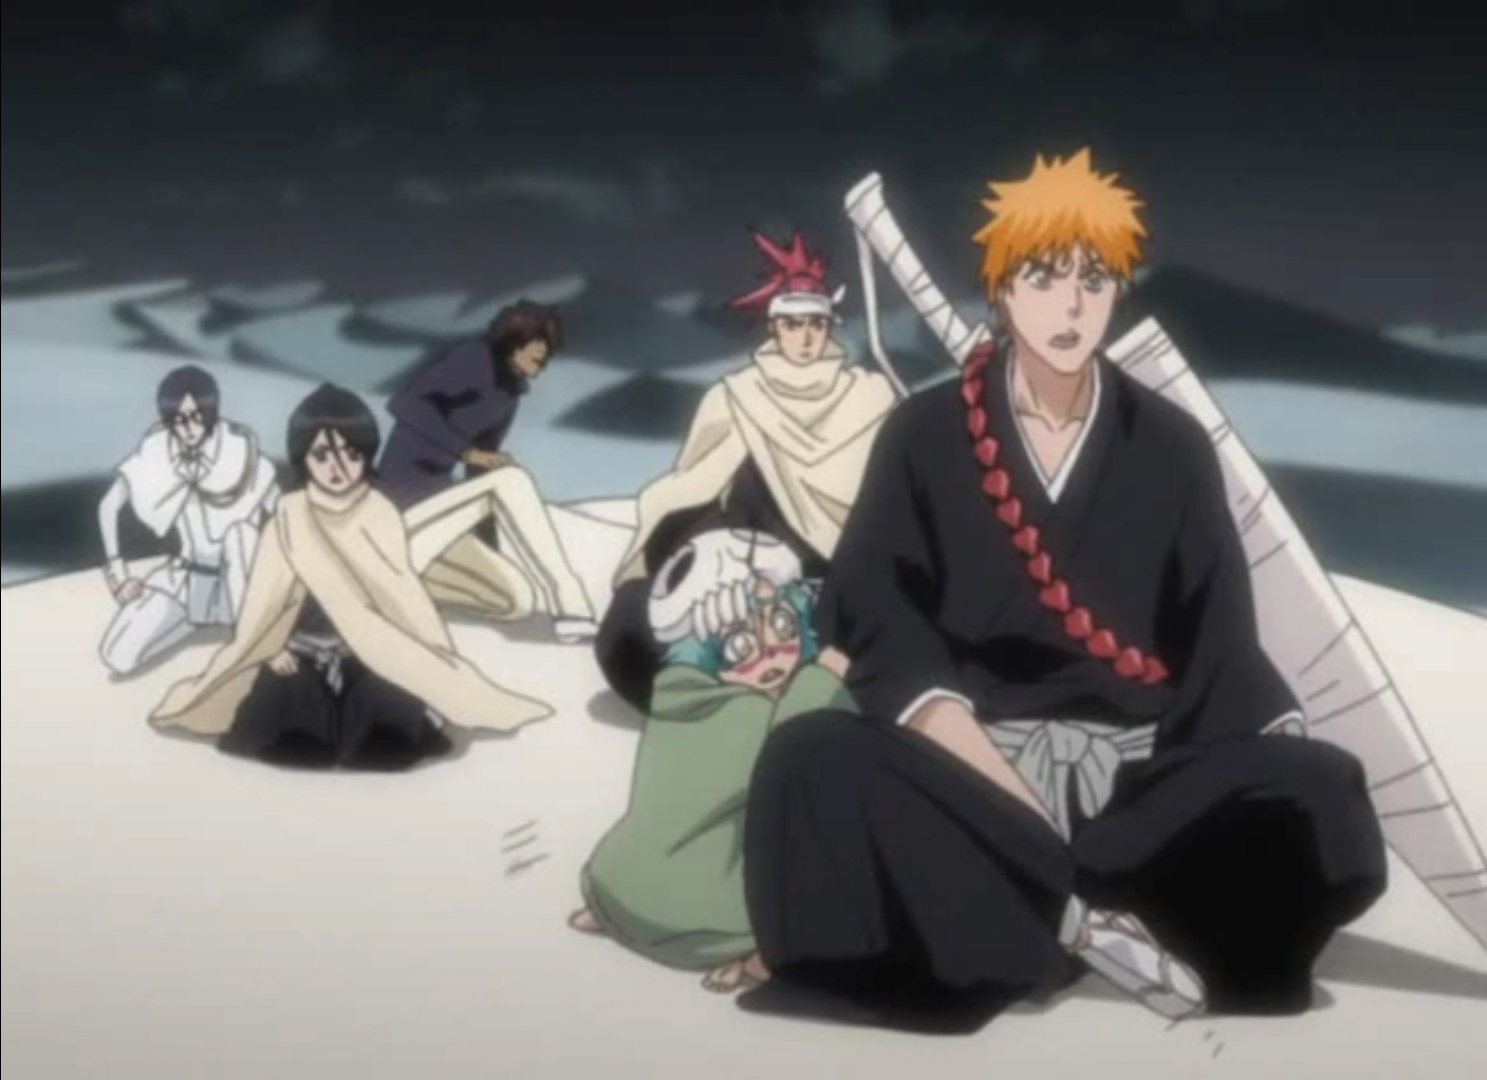 How many episodes can we expect from the final arc of bleach ? To be honest  I am just curious. : r/bleach